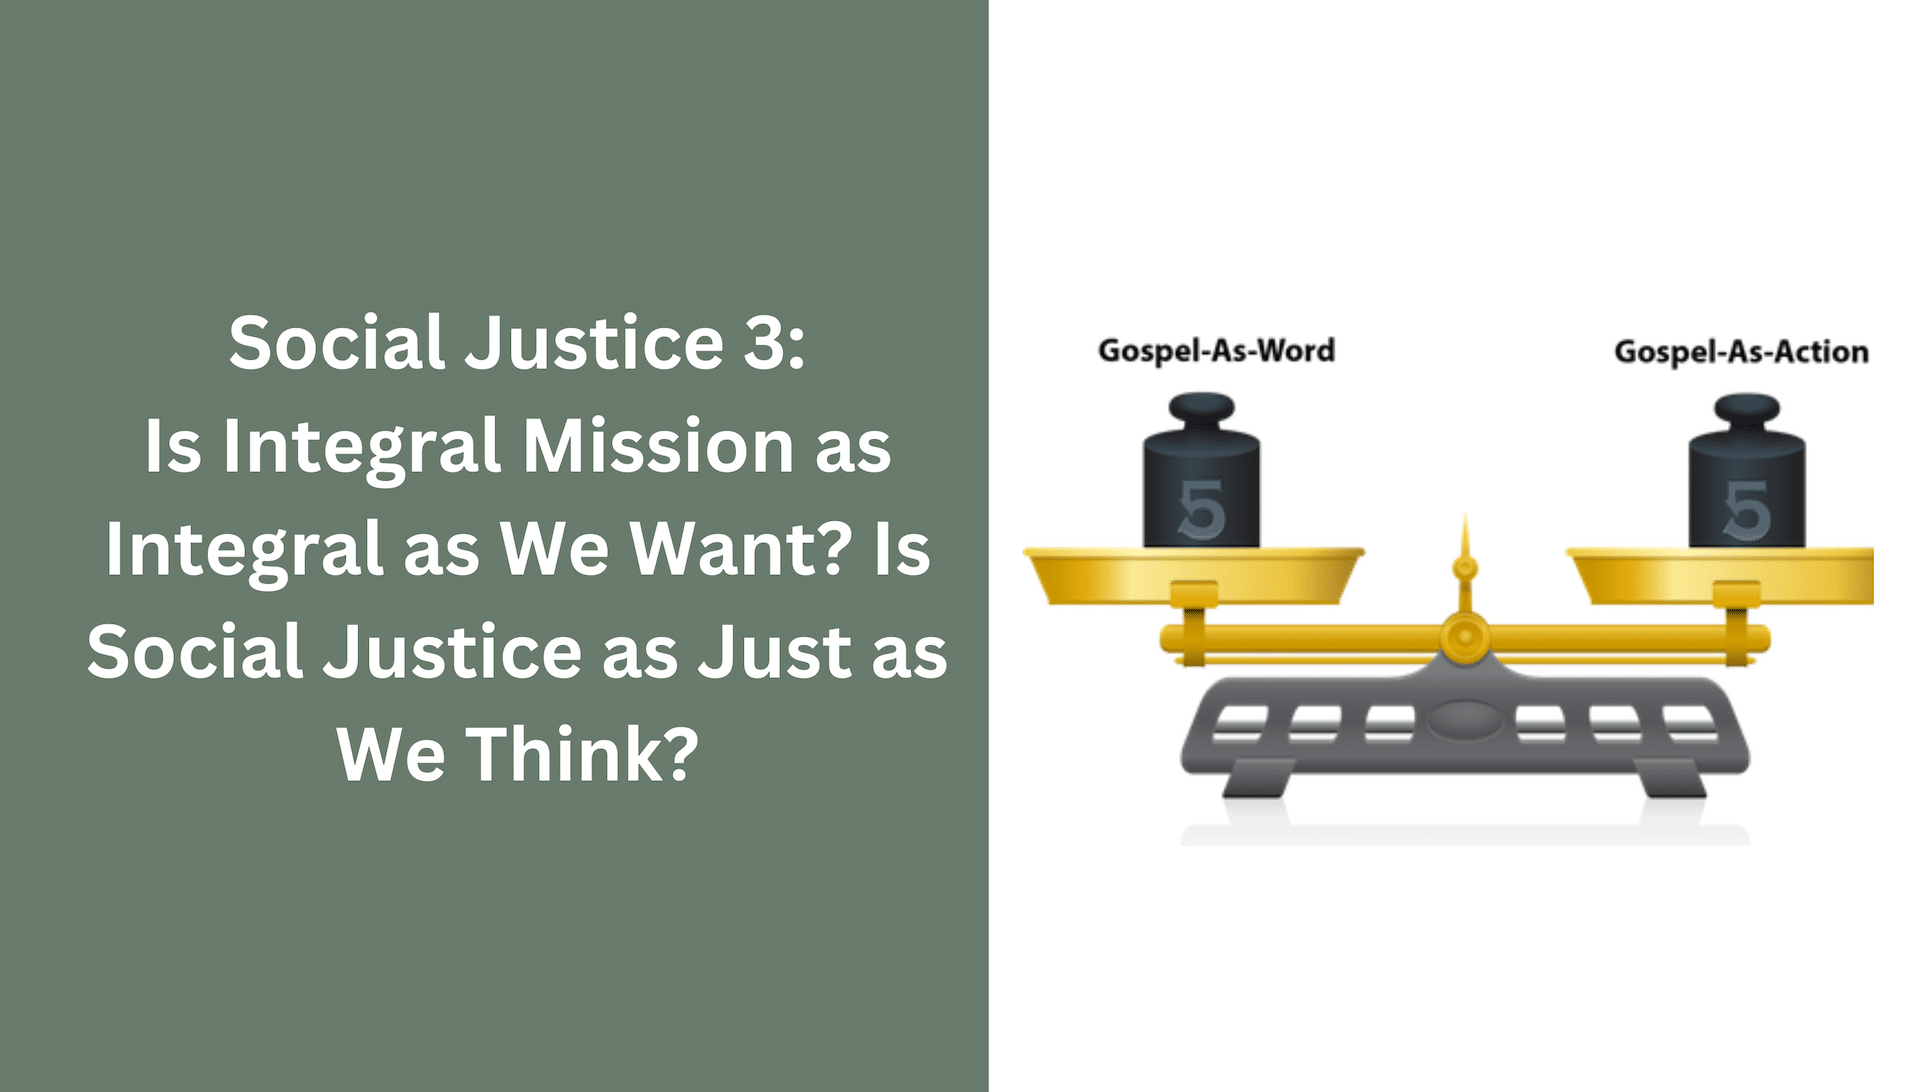 Social justice 3: Is integral mission as integral as we want? Is social justice as just as we think?